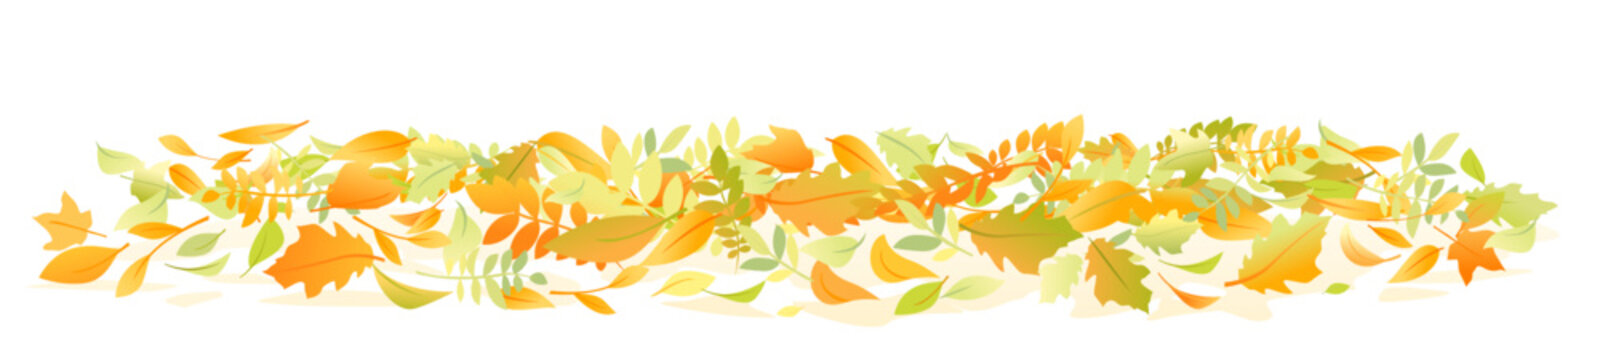 Group of various autumn fallen leaves in red and orange colors lying on ground isolated, dump of different leaves, autumn concept illustration clipart